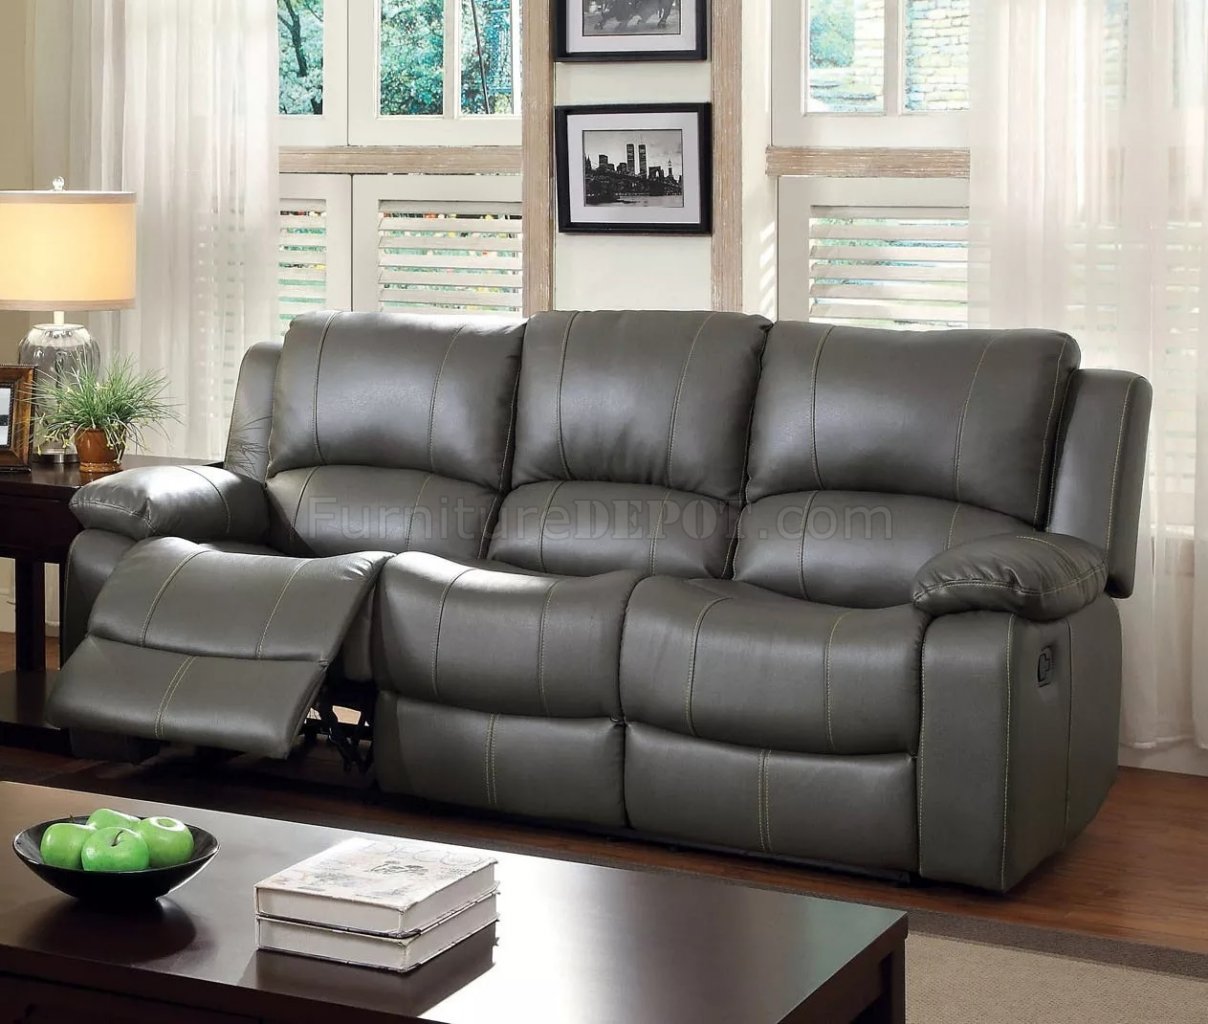 Sarles Reclining Sofa Cm6326 In Gray, Gray Leather Reclining Sofa And Loveseat